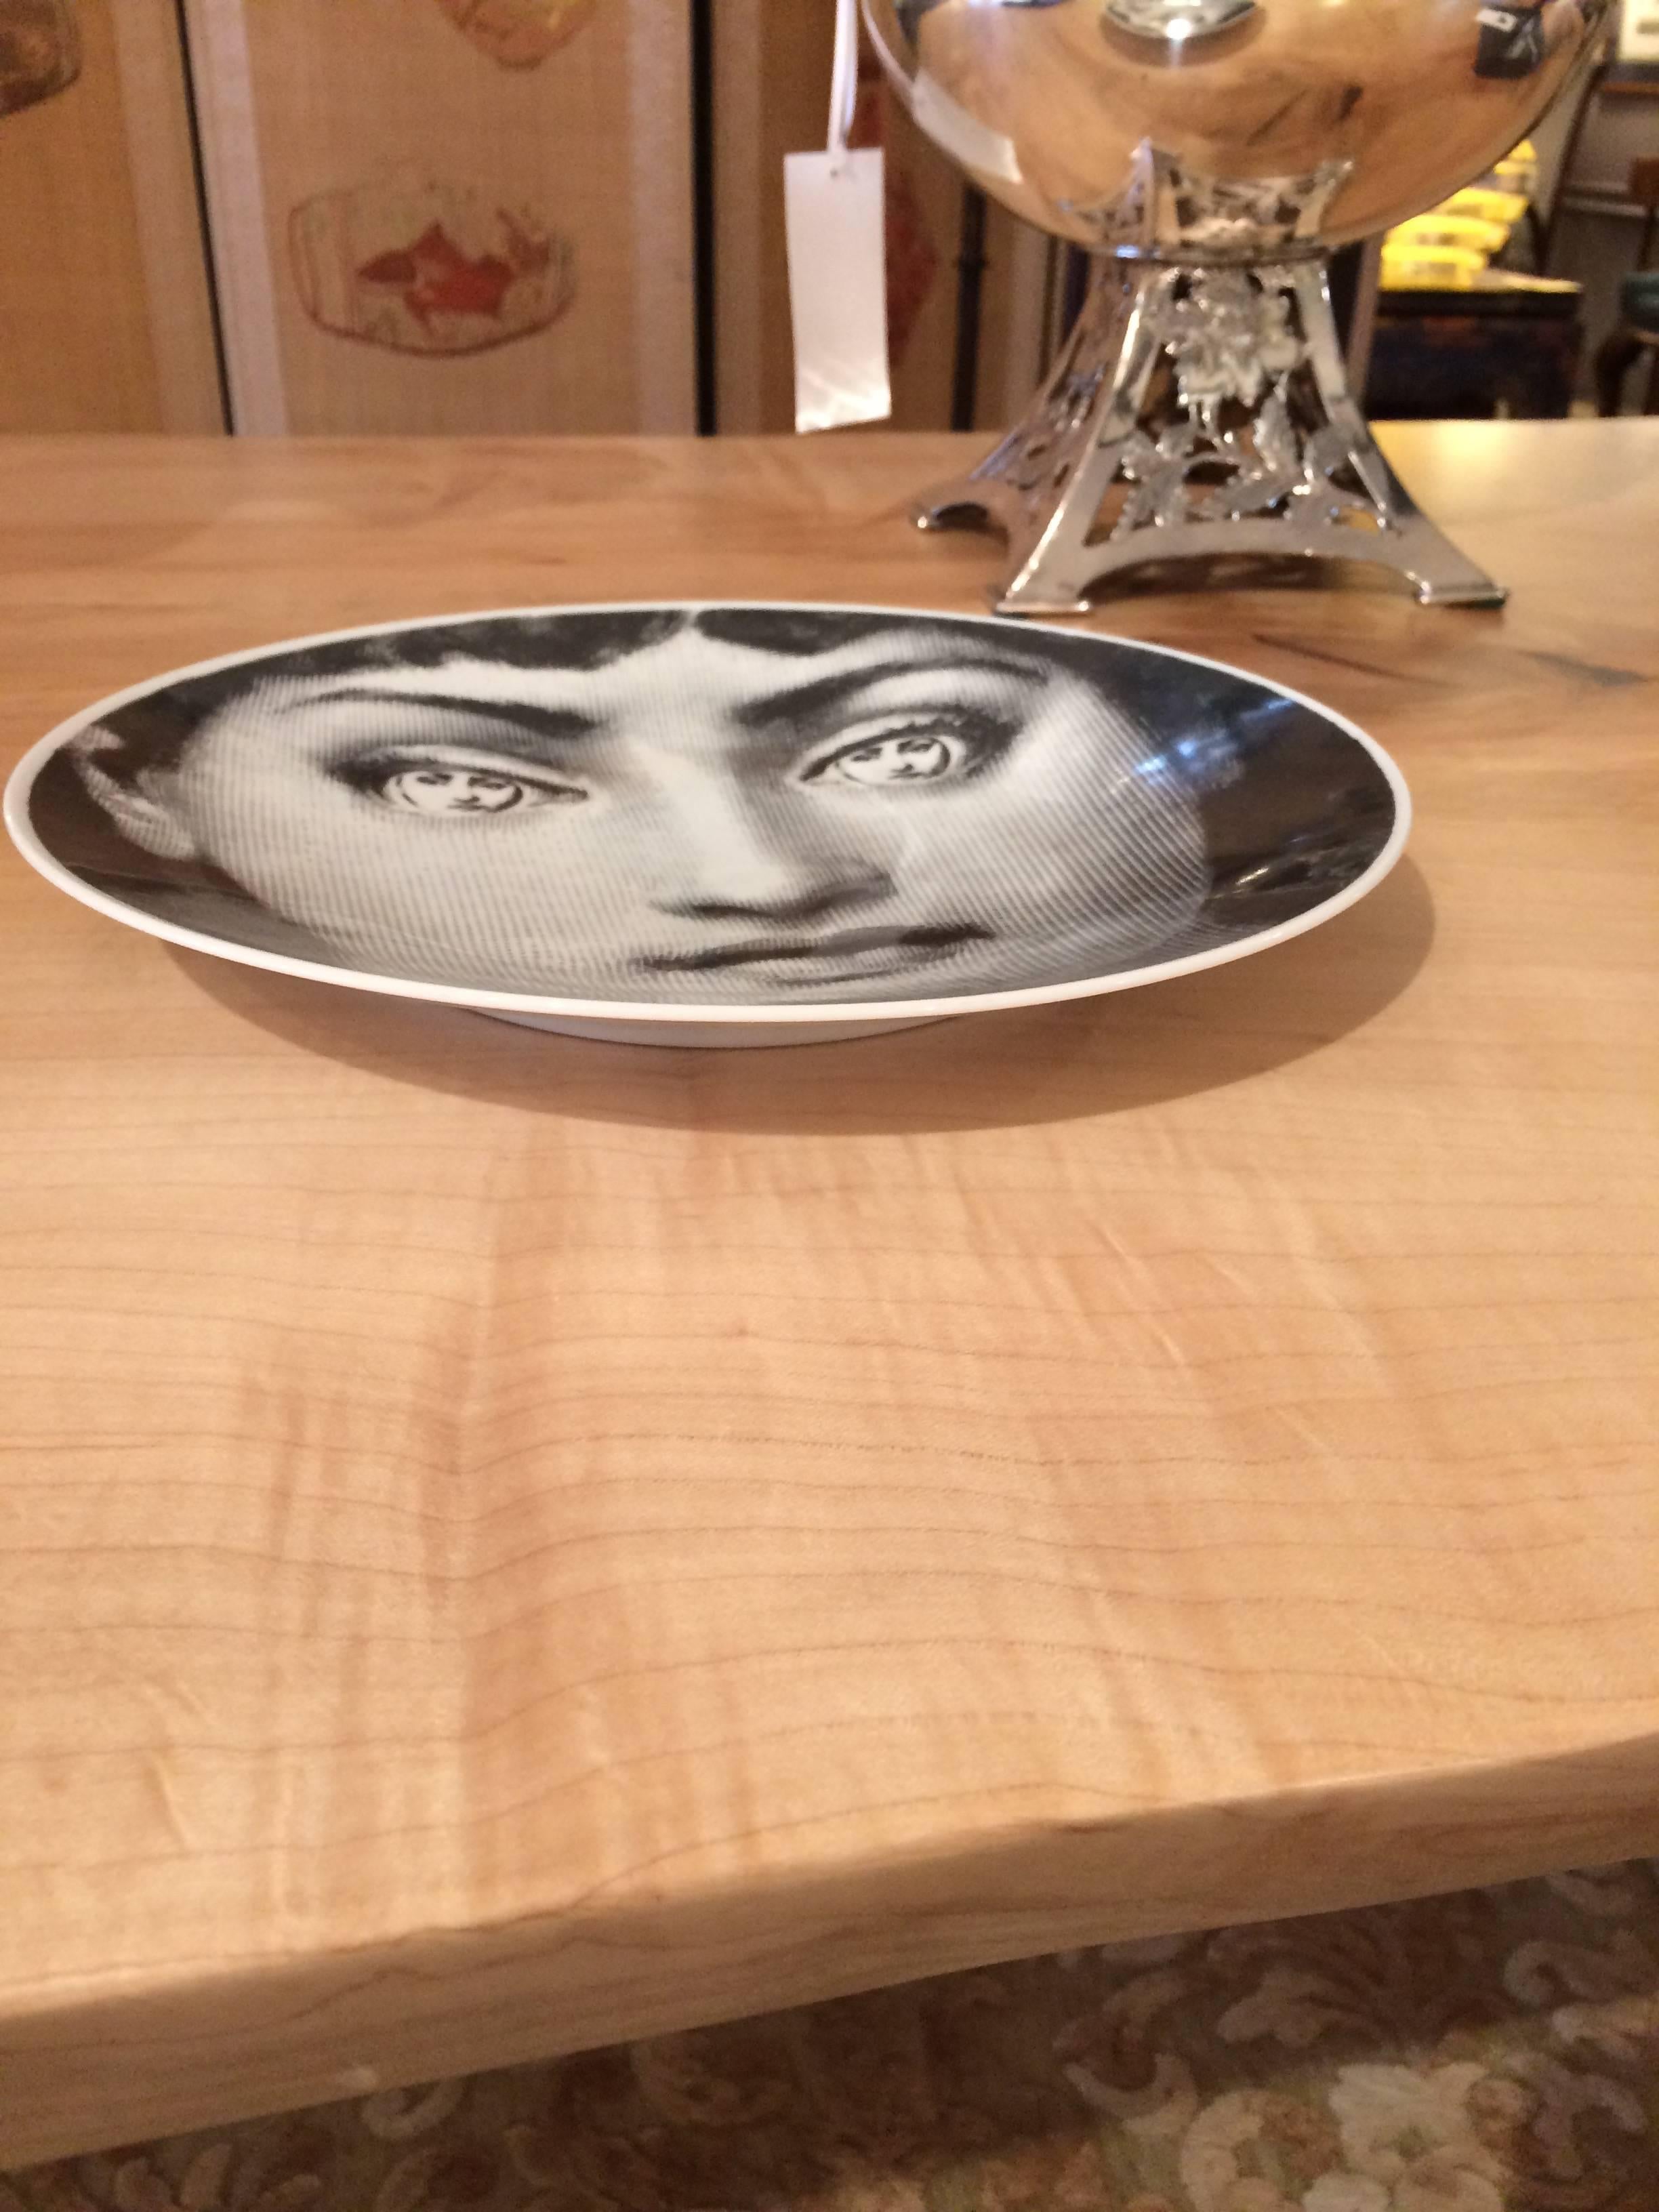 A beautiful graphic iconic Fornasetti plate having a woman's face with her full facial reflection in each eye. The Fornasetti stamp is on the reverse.